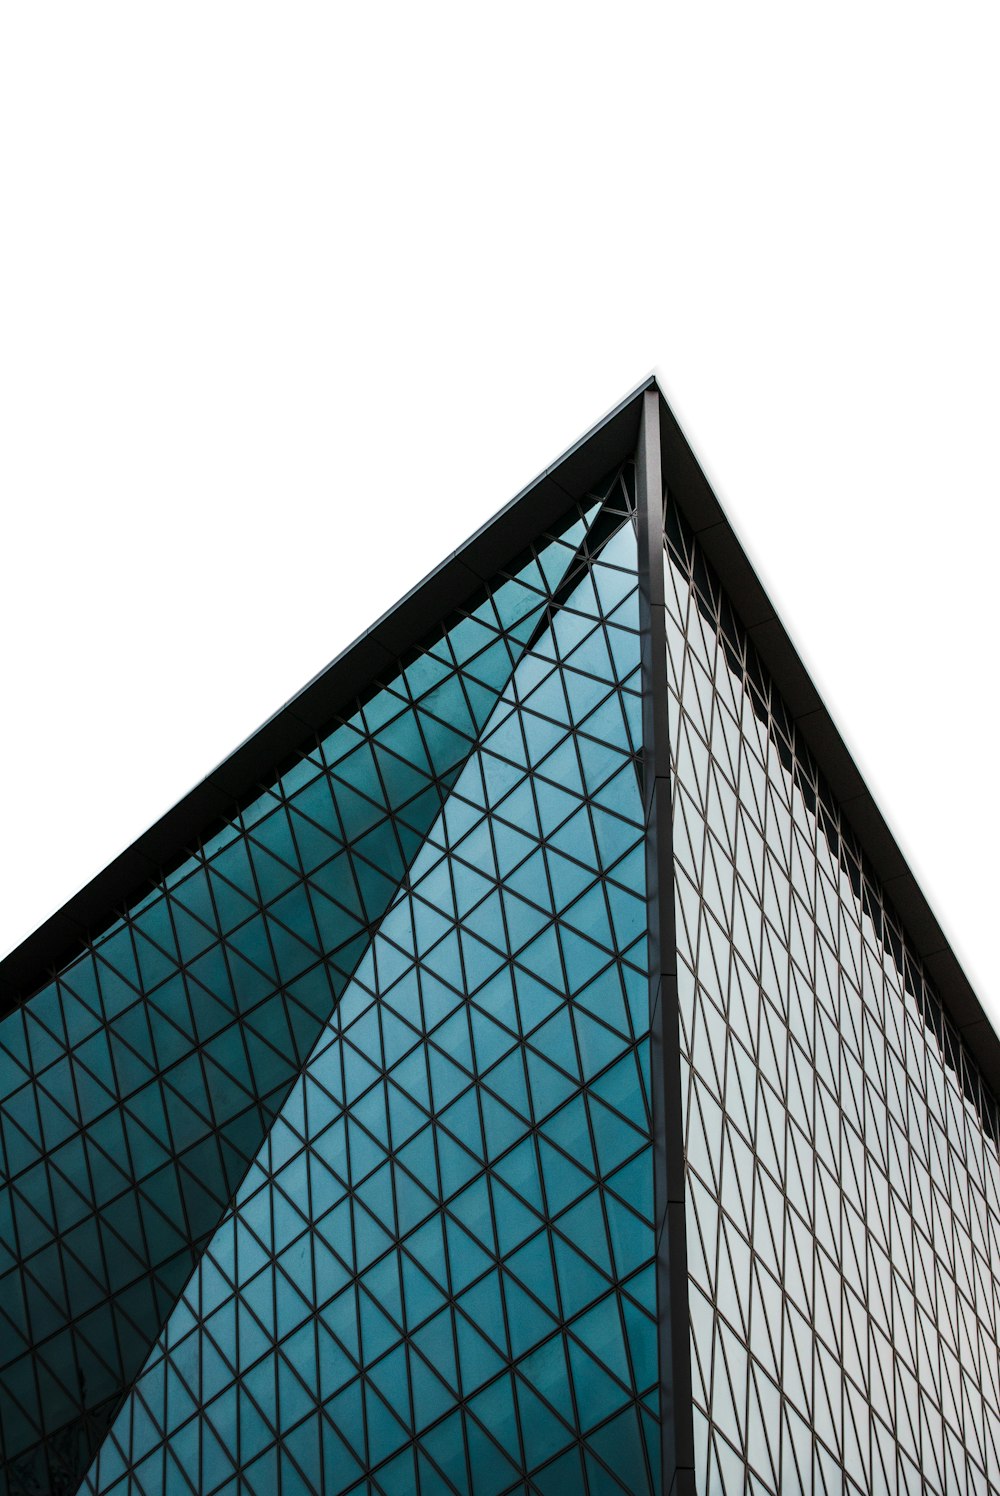 low-angle photography of gray glass walled high-rise building